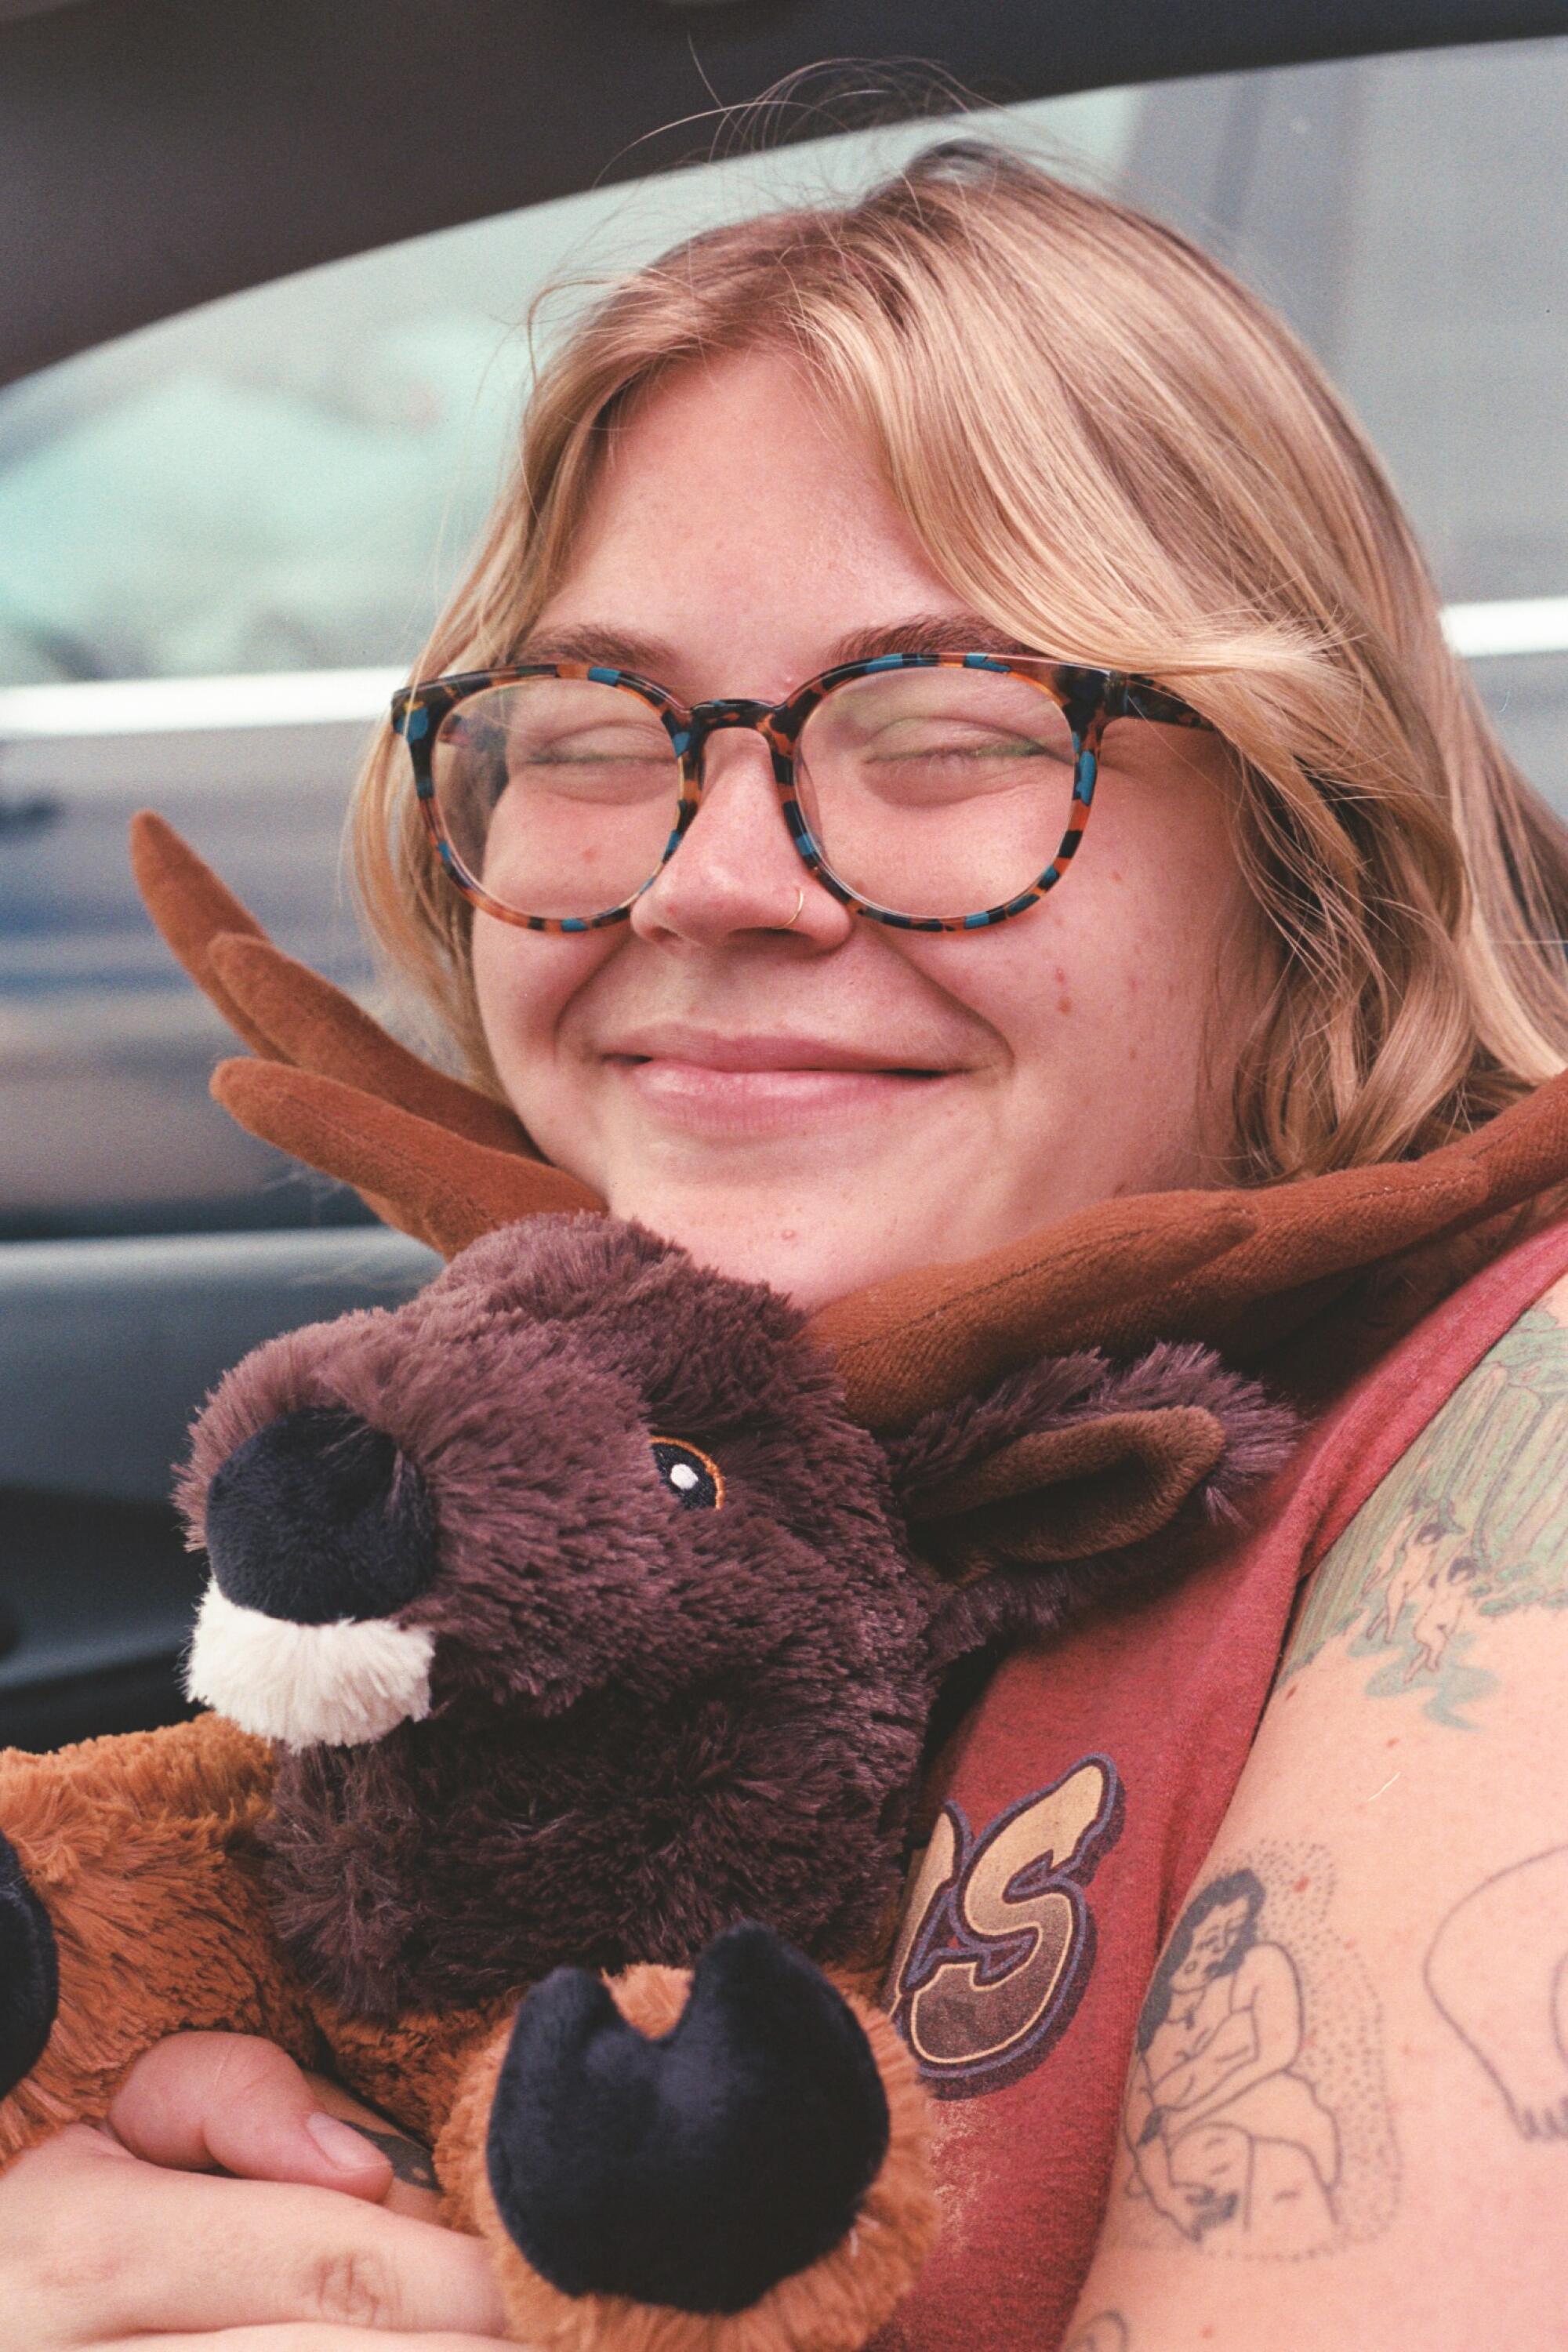 Julia and a new Elk stuffed animal named Peanut from the gift shop at Black Canyon of the Gunnison.